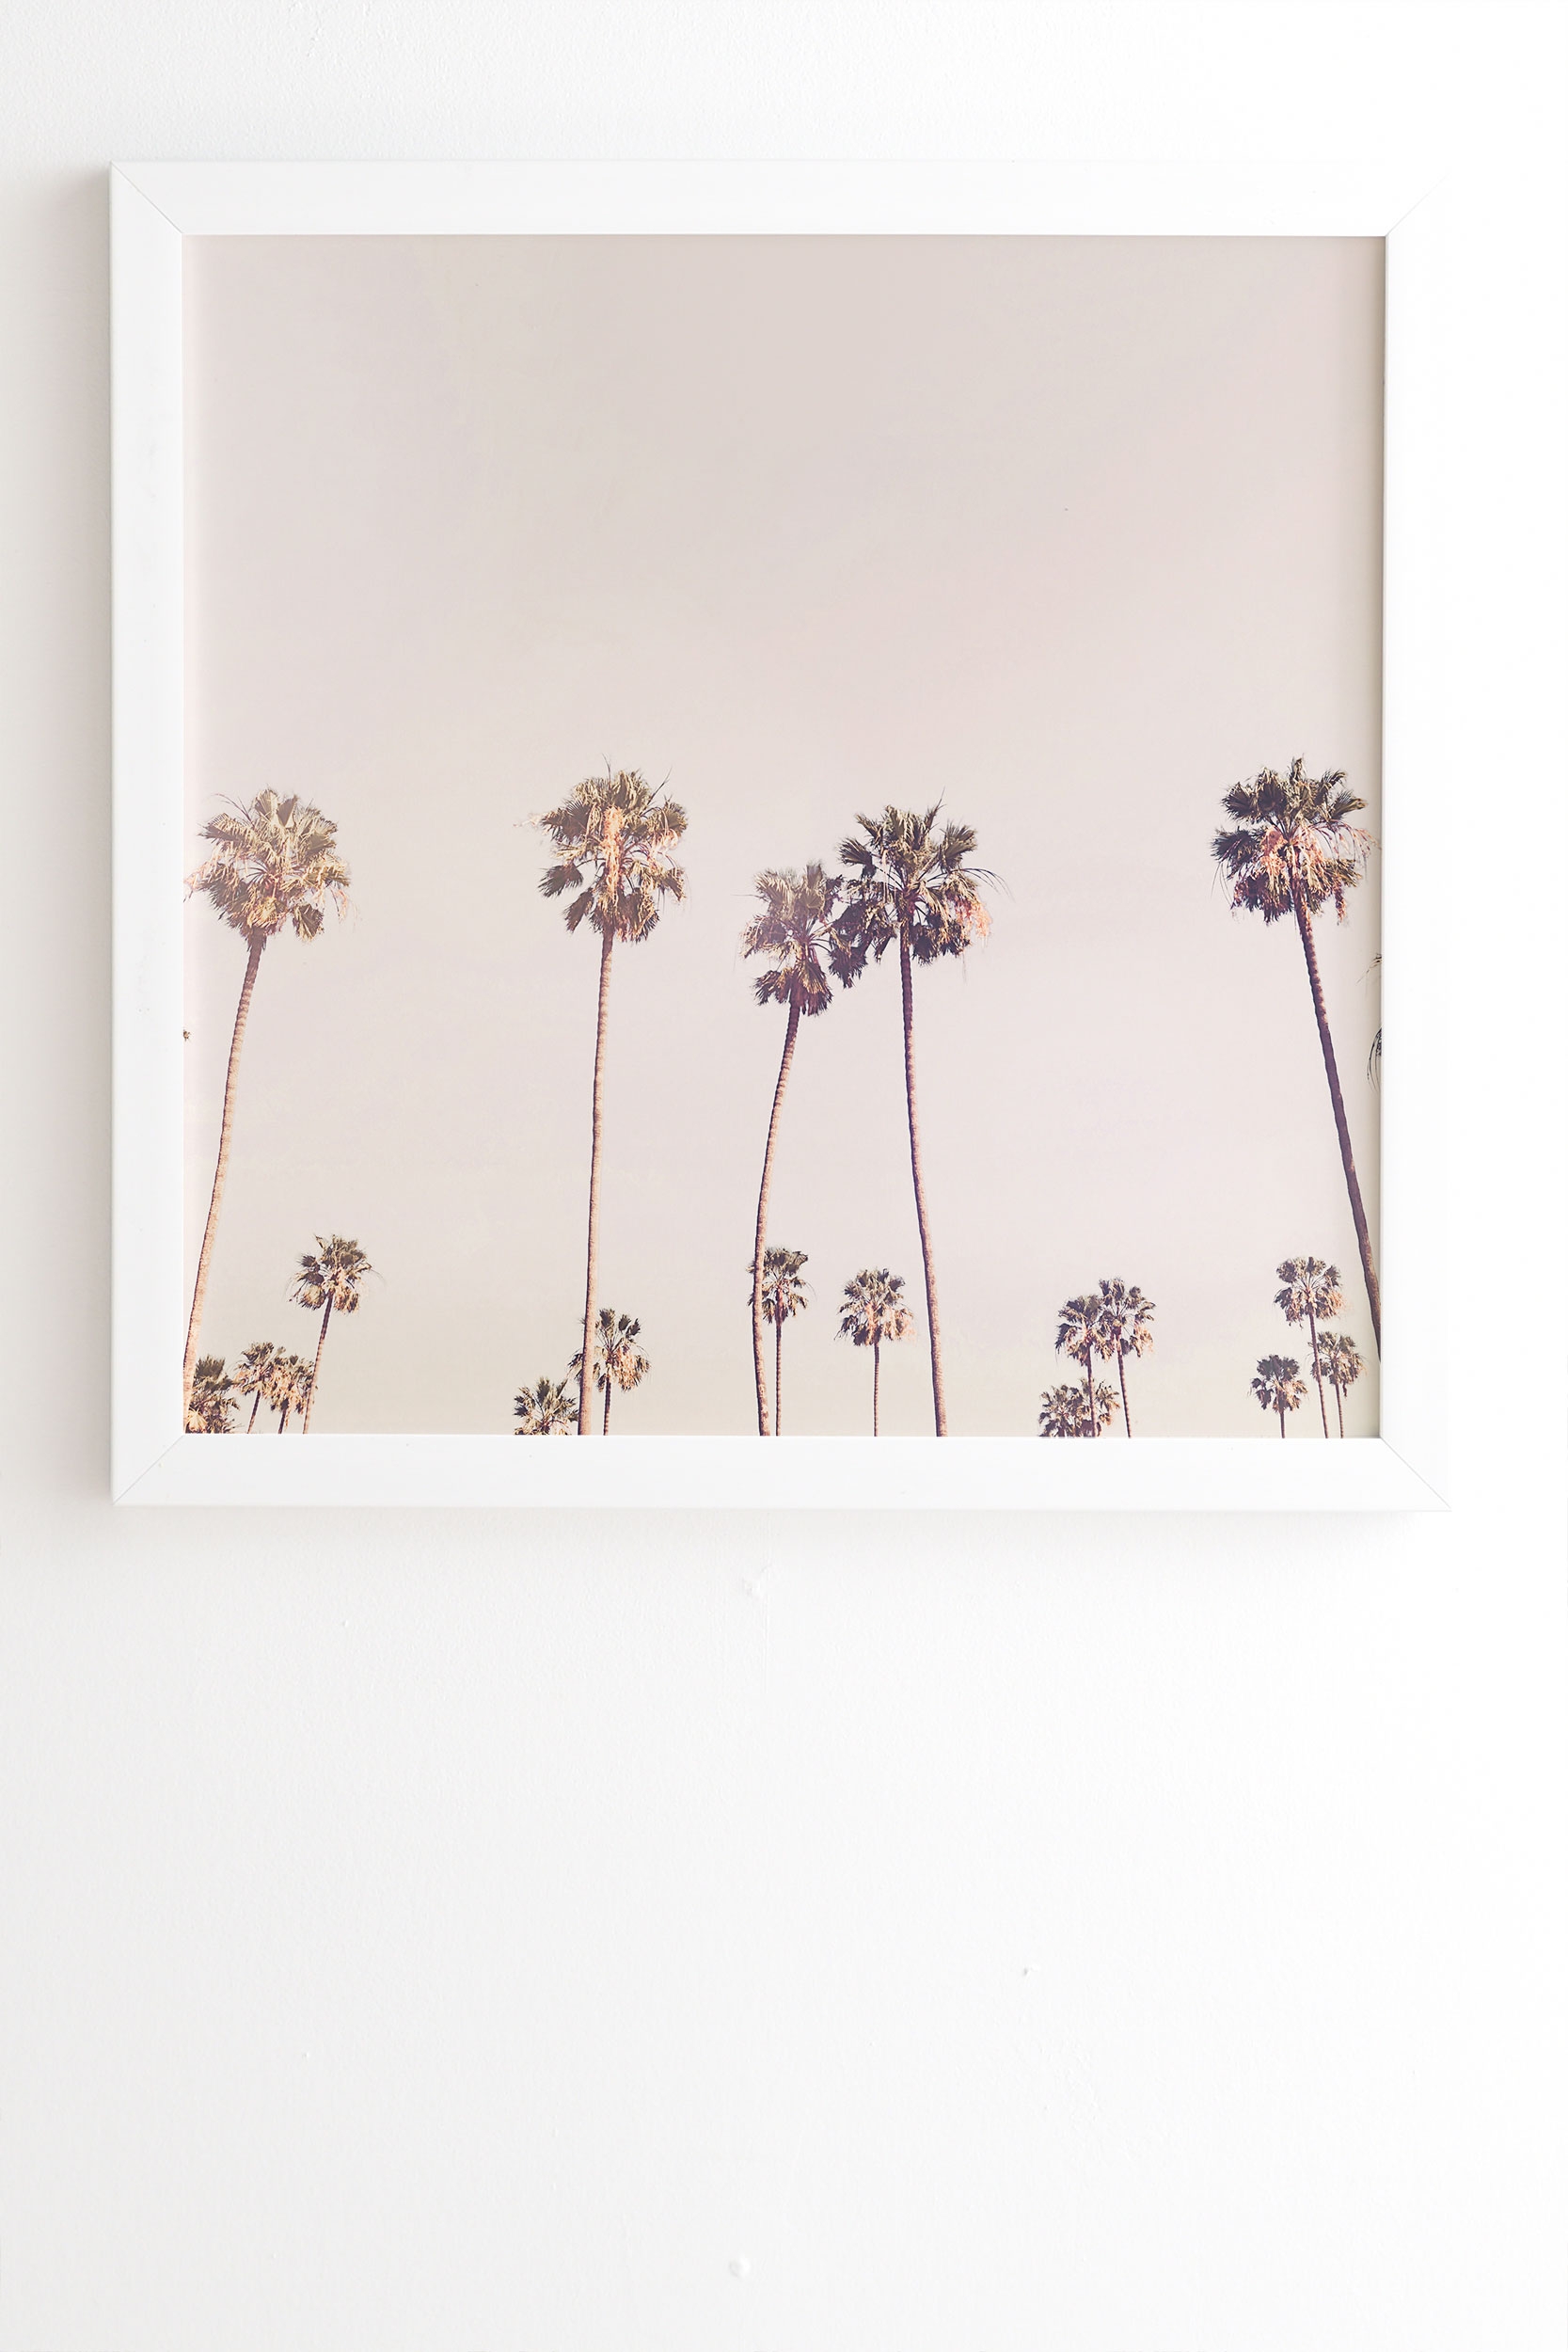 Sunny Cali Palm Trees by Sisi and Seb - Framed Wall Art Basic White 20" x 20" - Image 1